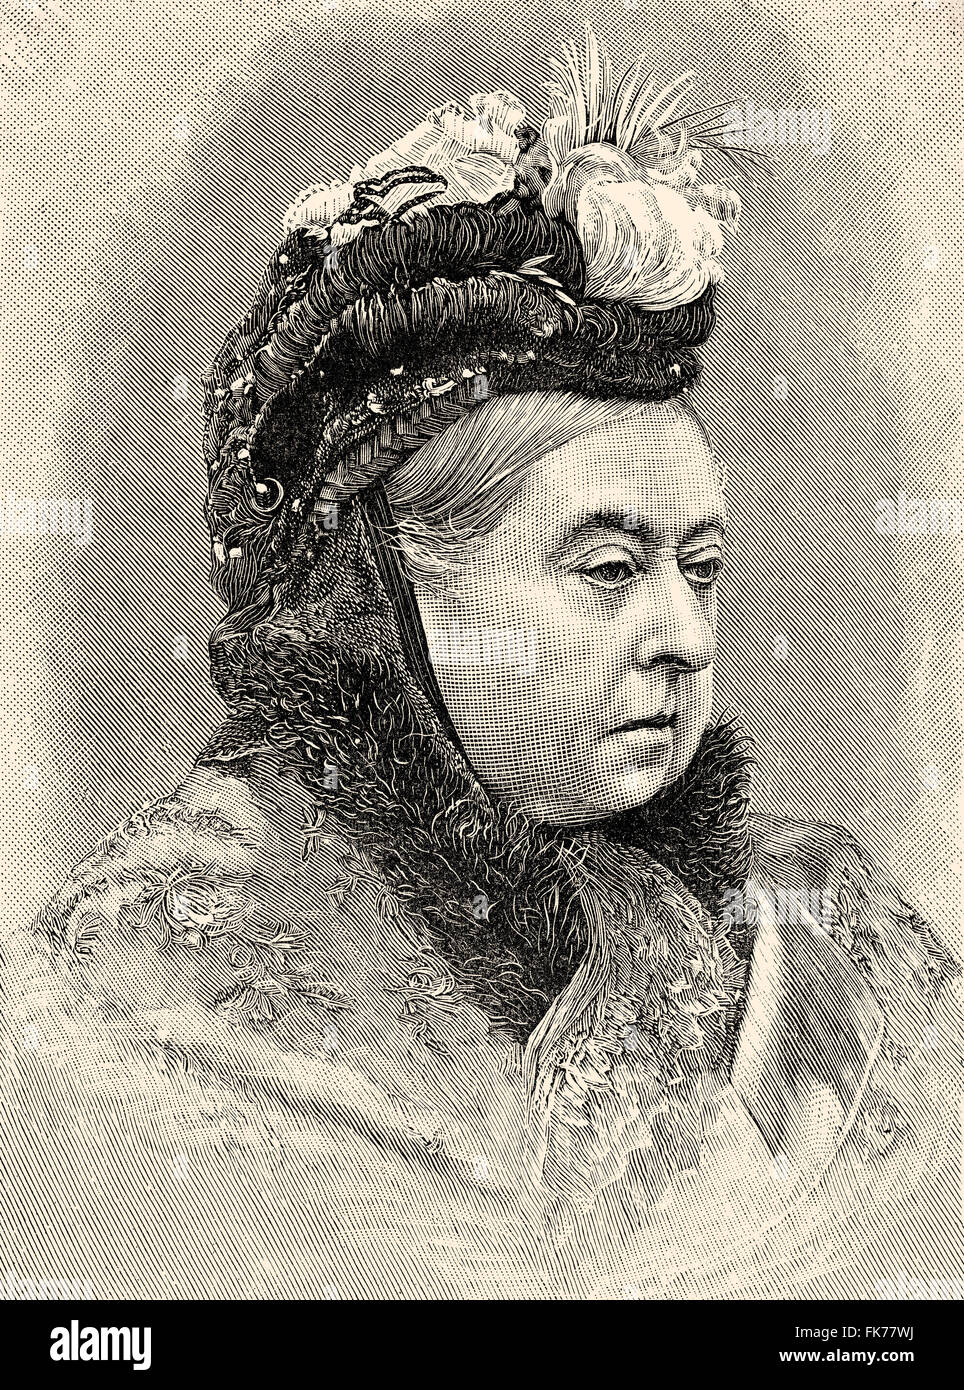 Queen Victoria or Alexandrina Victoria, 1819 - 1901, Queen of the United Kingdom of Great Britain and Ireland, Empress of India Stock Photo